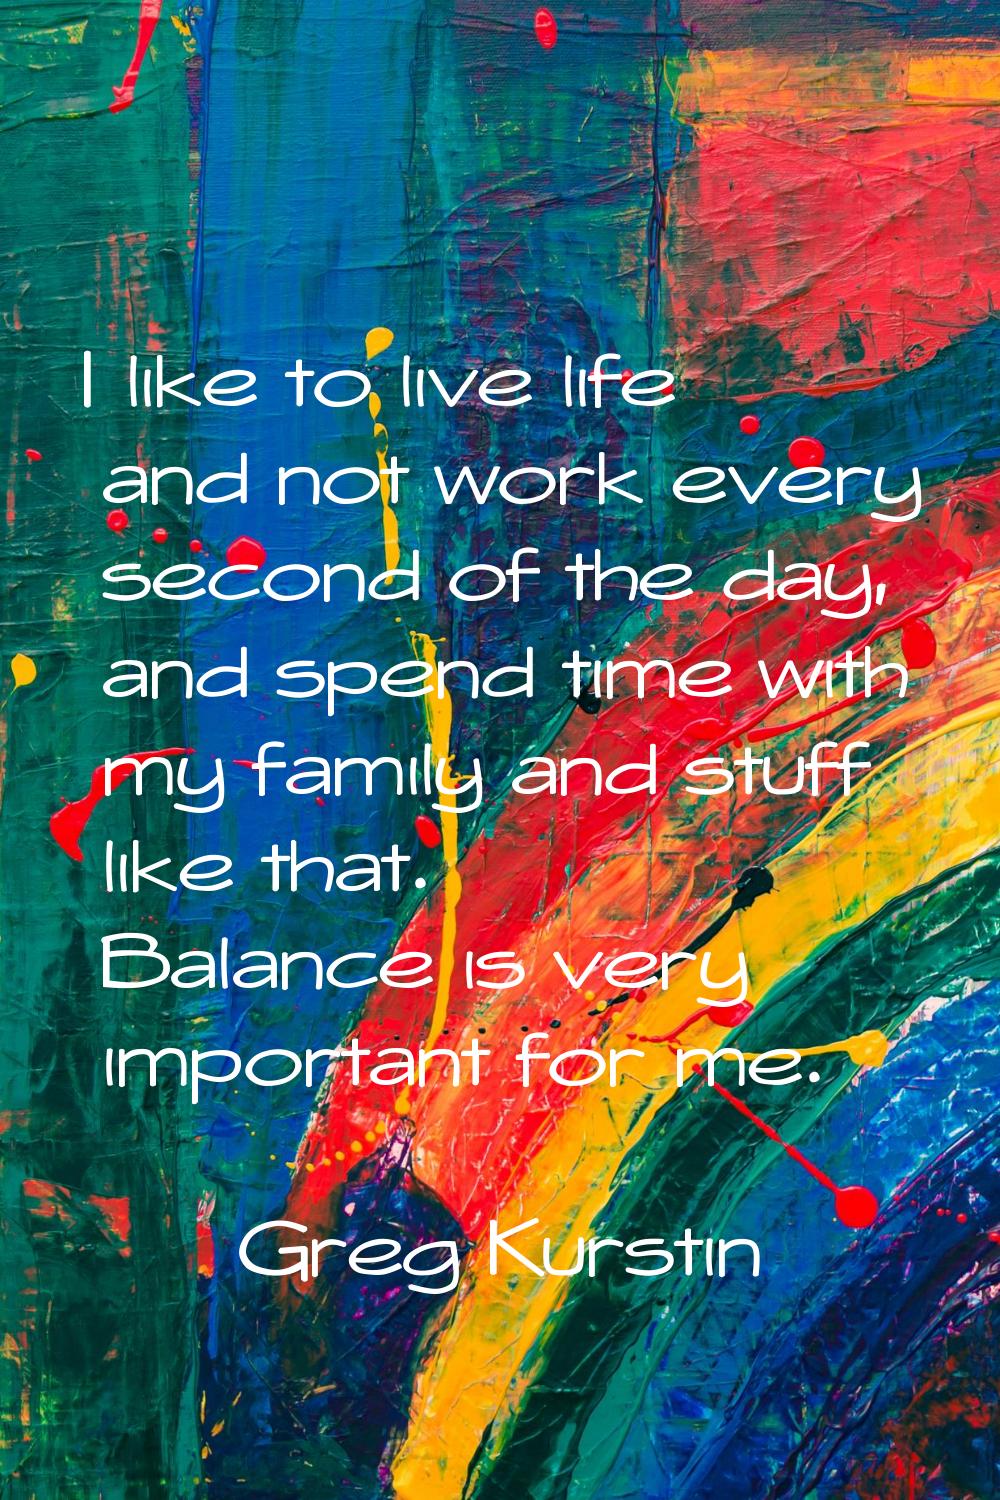 I like to live life and not work every second of the day, and spend time with my family and stuff l